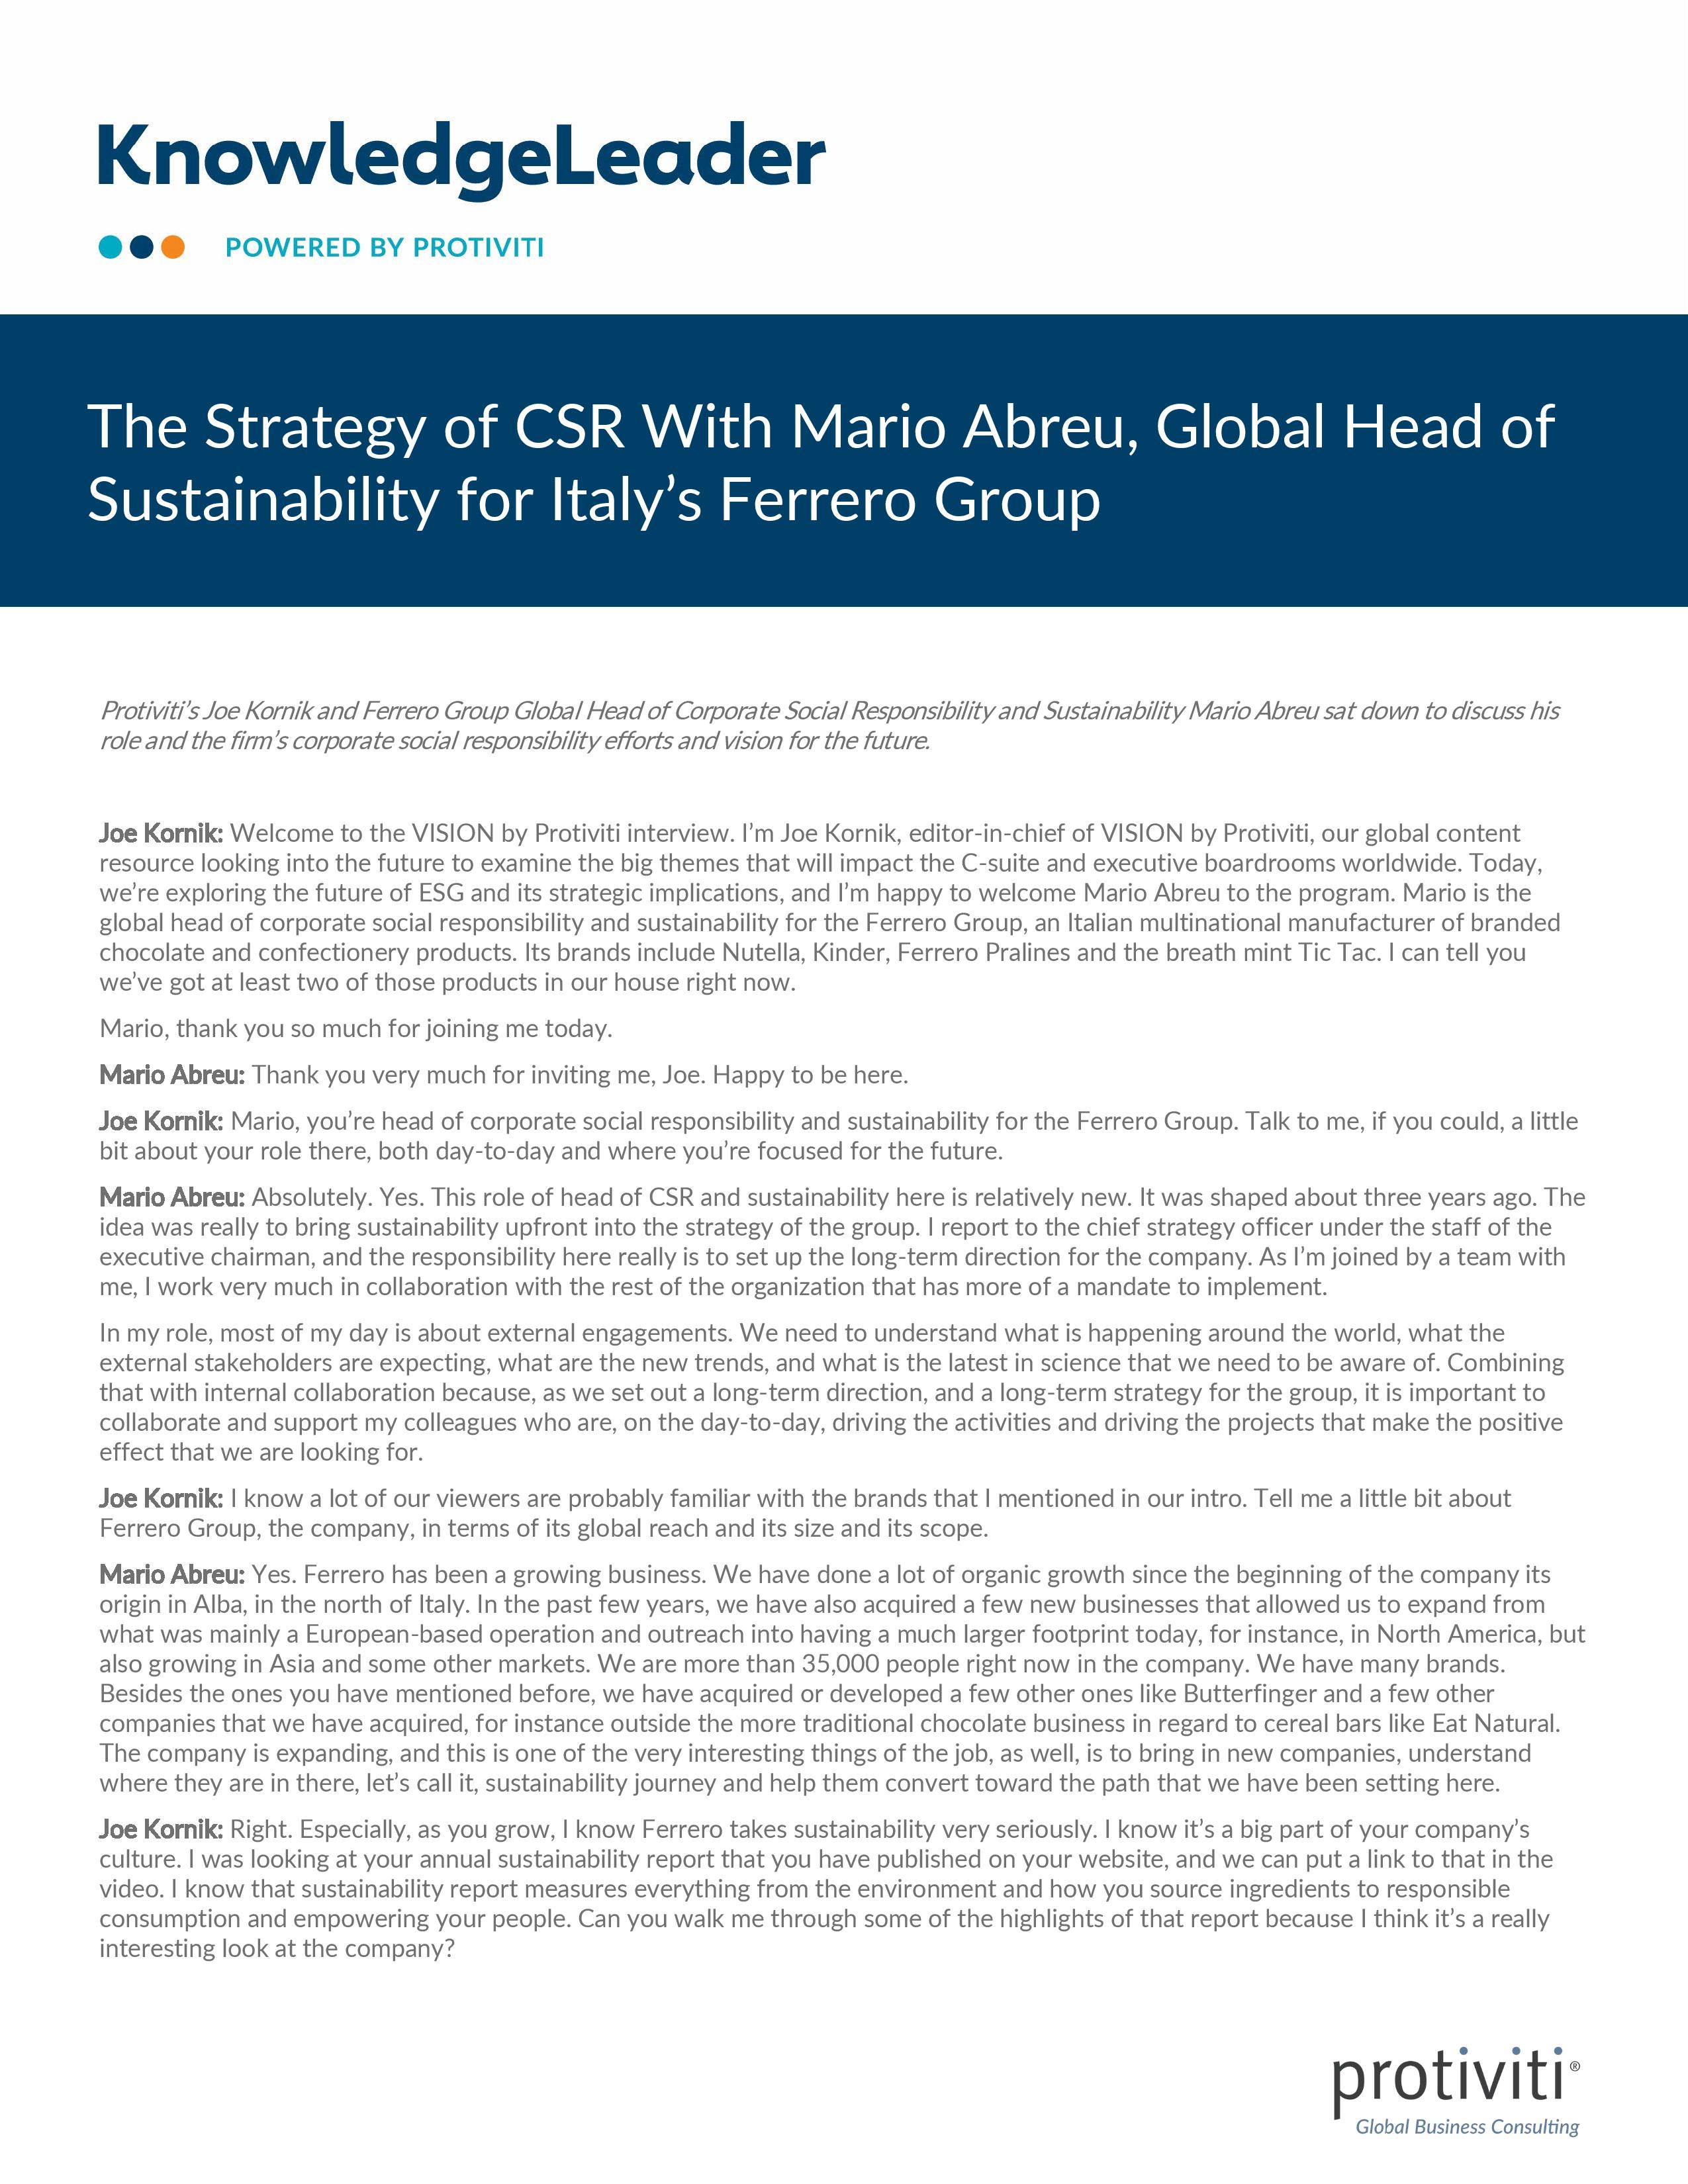 Screenshot of the First Page of The Strategy of CSR With Mario Abreu, Global Head of Sustainability for Italys Ferrero Group